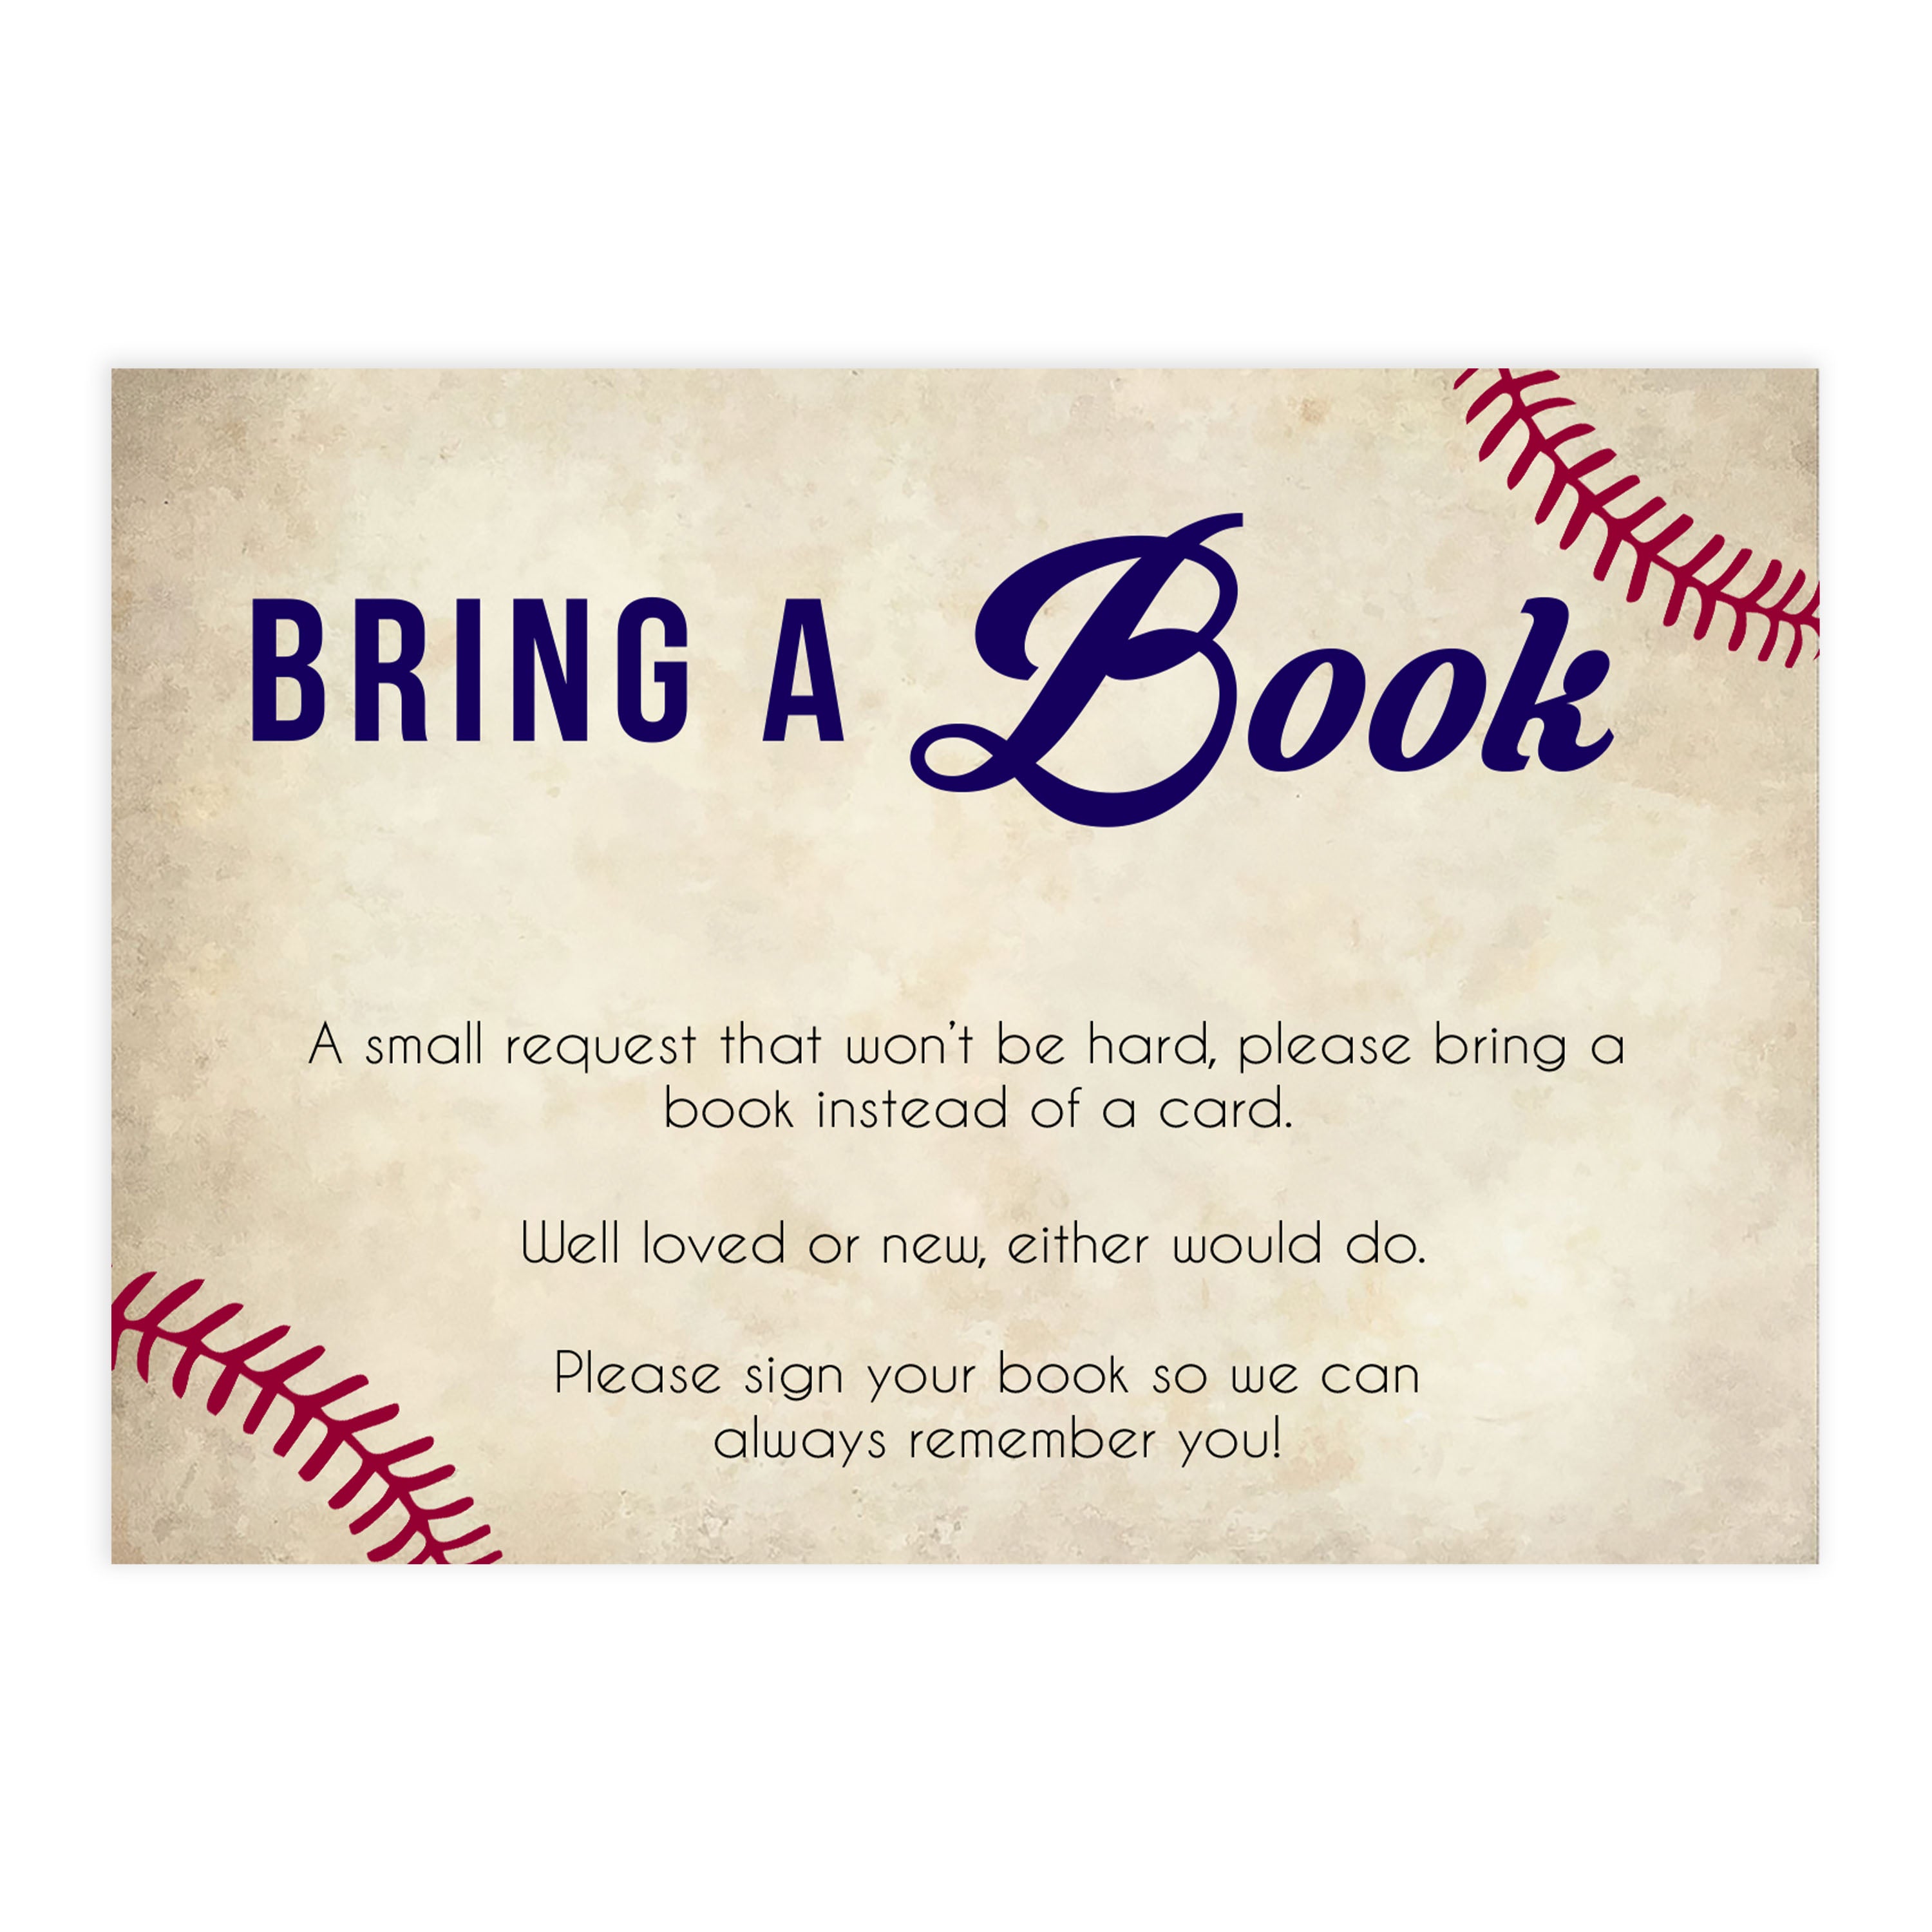 books for baby insert, bring a book for baby insert, Baseball baby shower games, printable baby shower games, fun baby shower games, top baby shower ideas, little slugger baby games